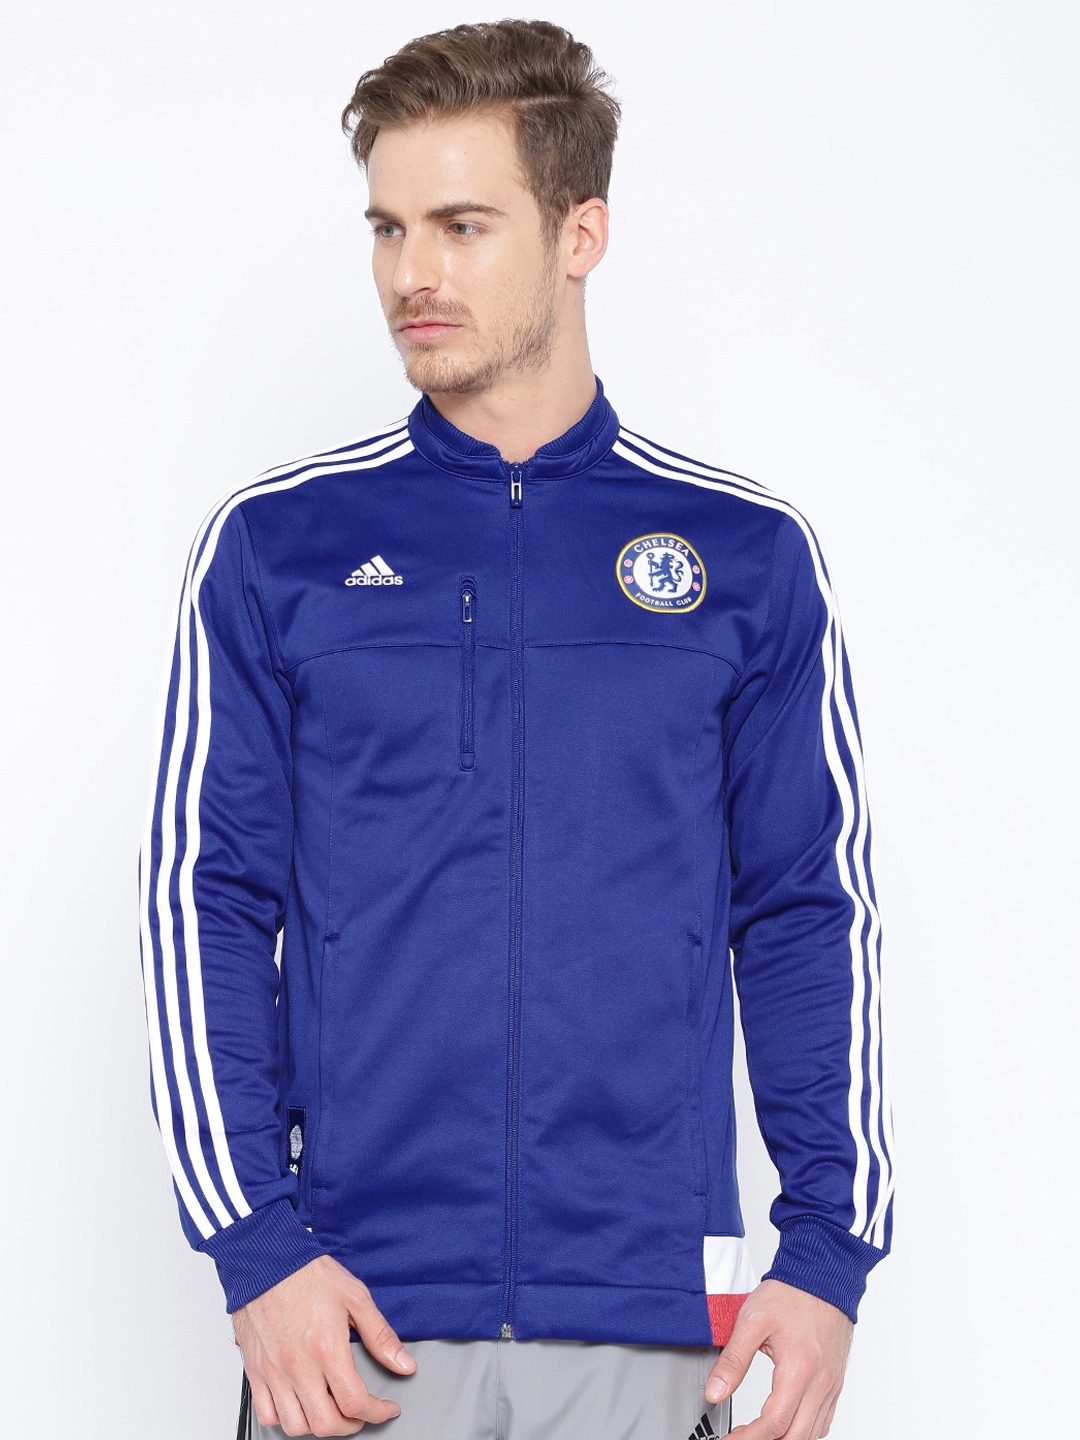 Buy ADIDAS Blue Chelsea F.C. ANTH Jacket - Jackets for Men 1019429 | Myntra